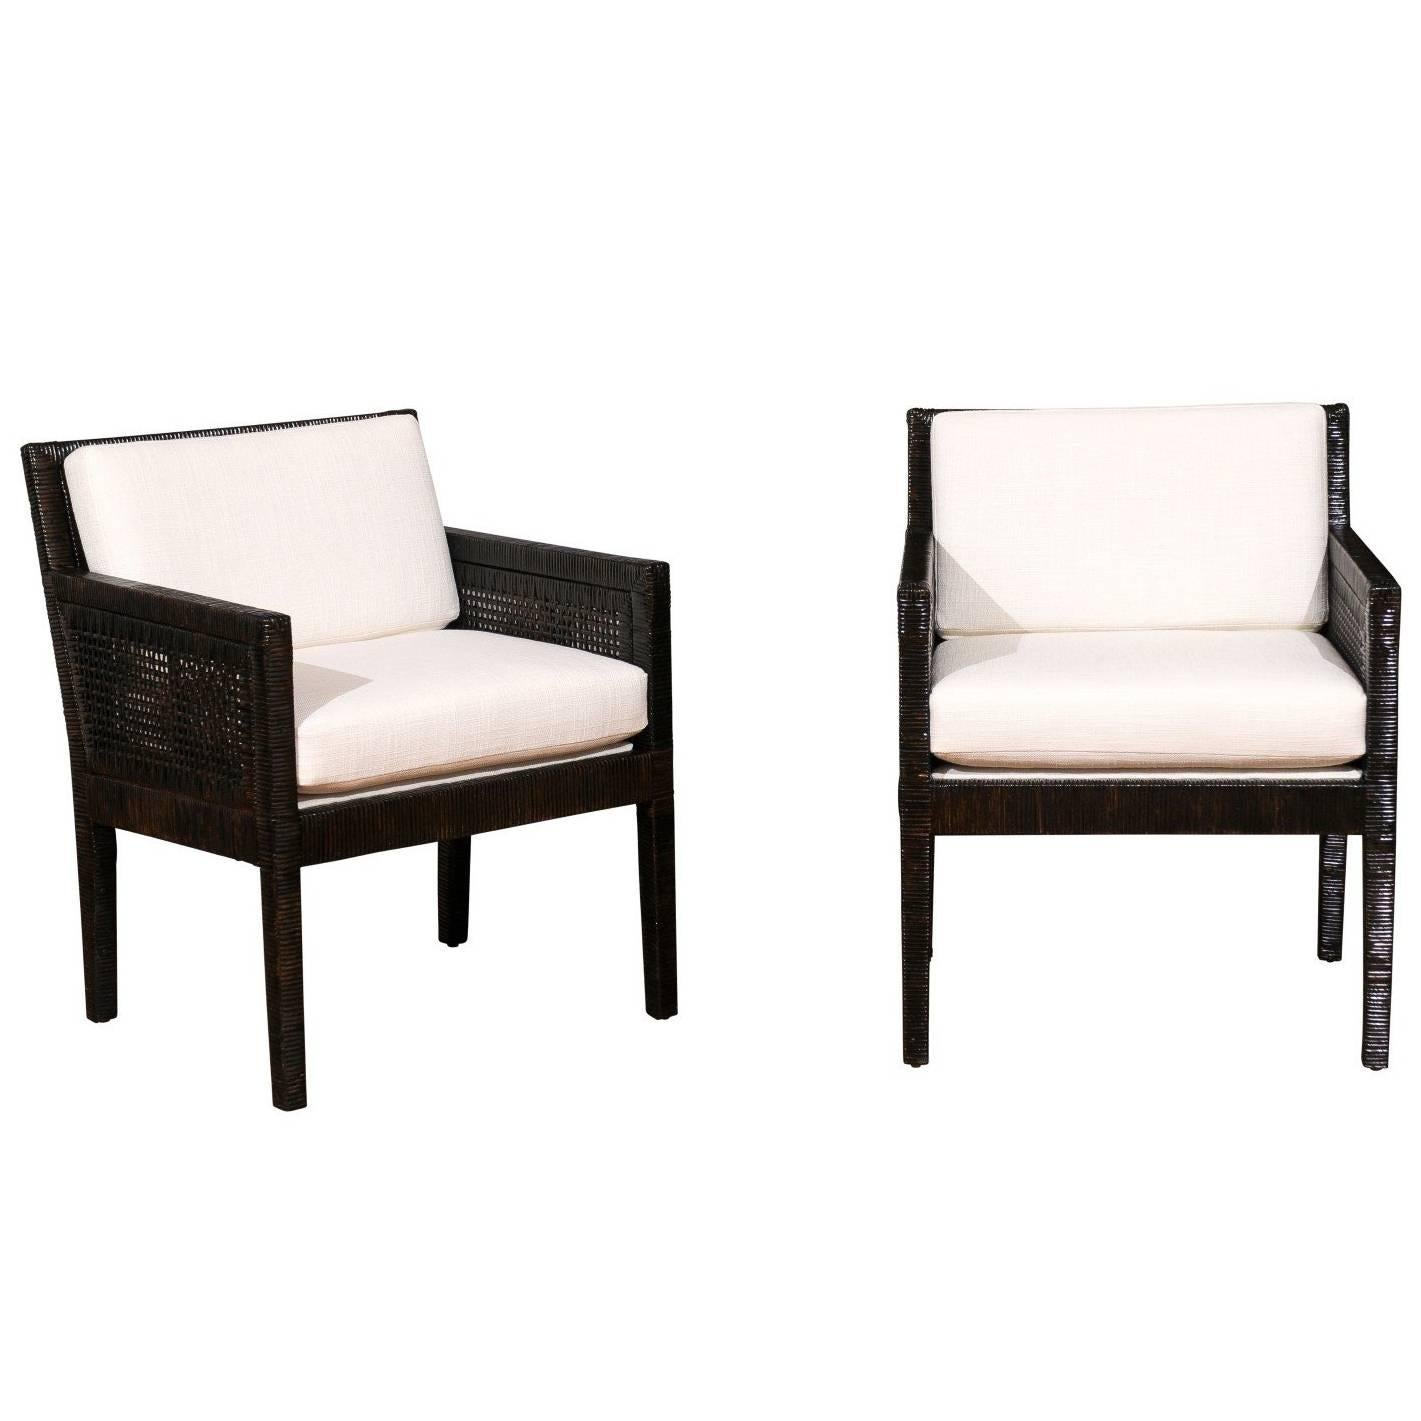 Exquisite Pair of Restored Loungers by Billy Baldwin for Bielecky Brothers